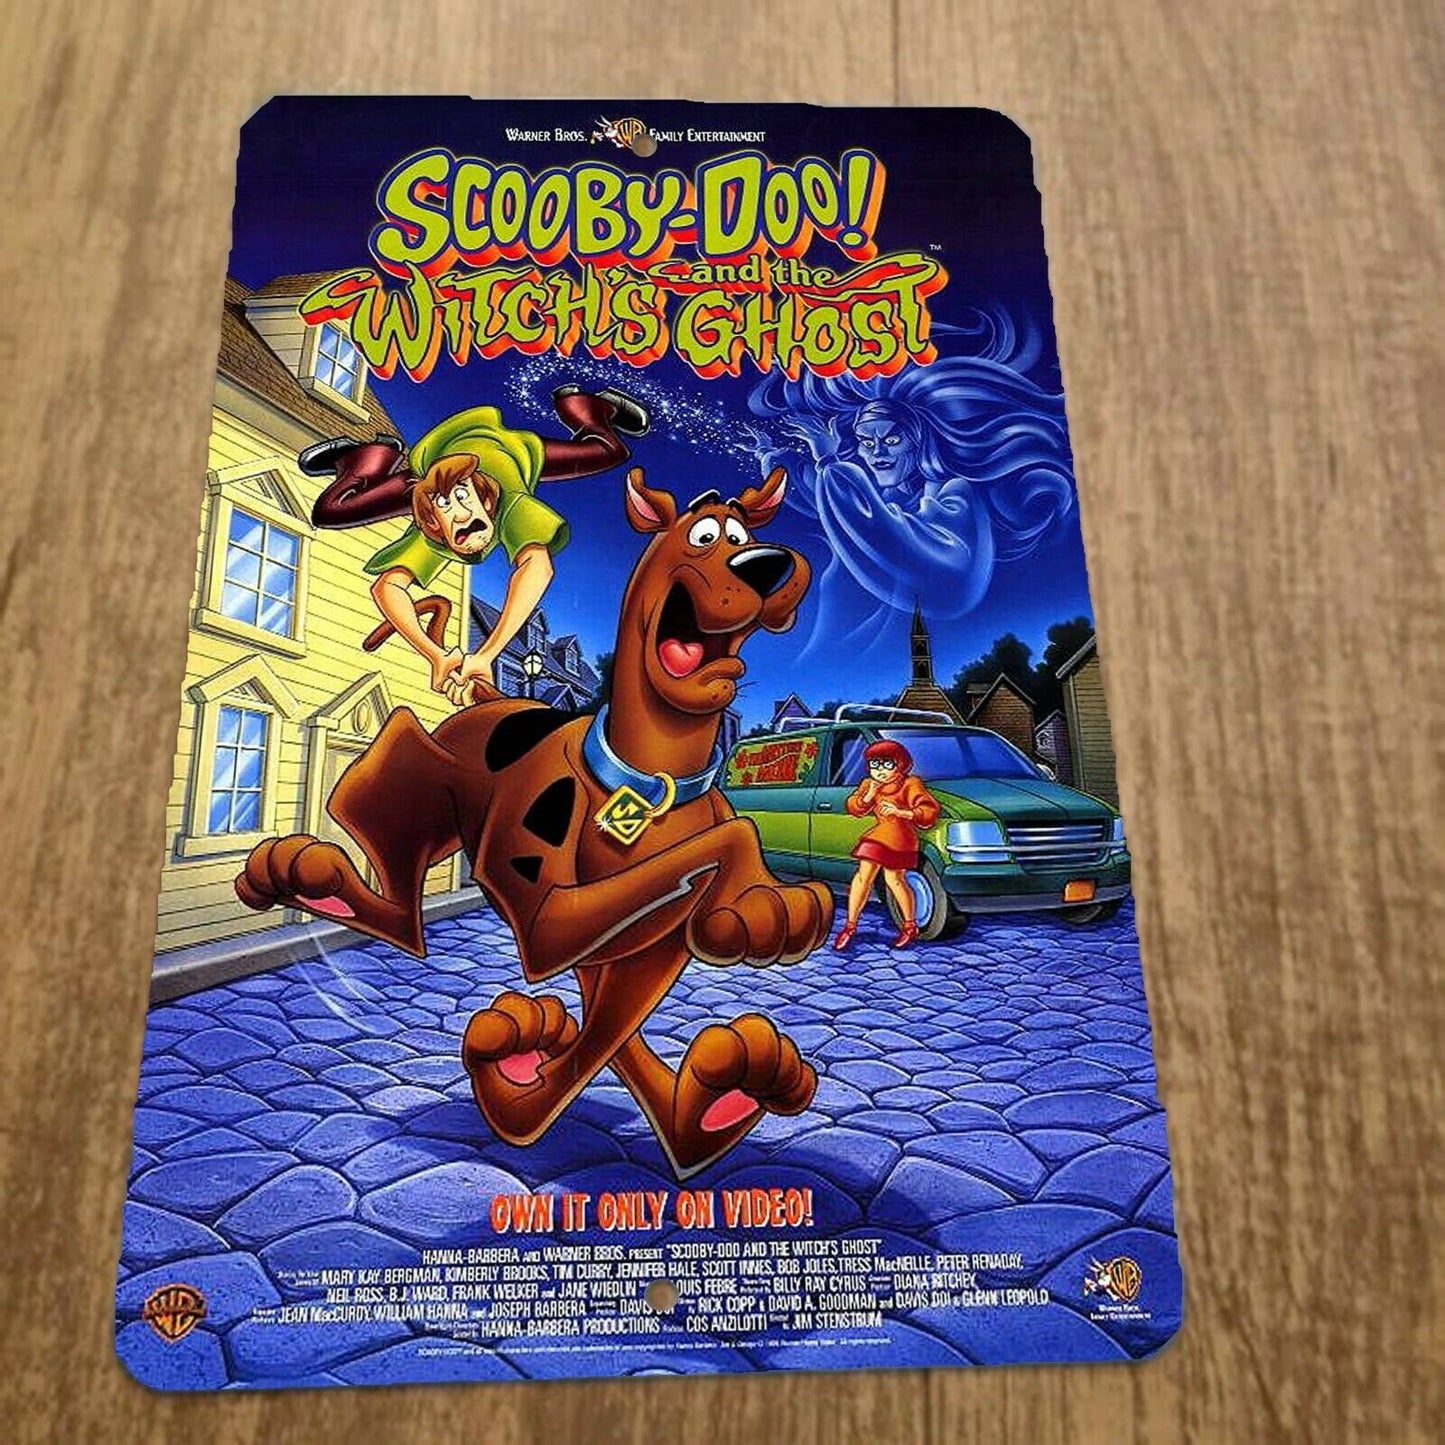 Scooby Doo and the Witchs Ghost Cover Art 8x12 Metal Wall Sign Hanna Barbera Classic Cartoon